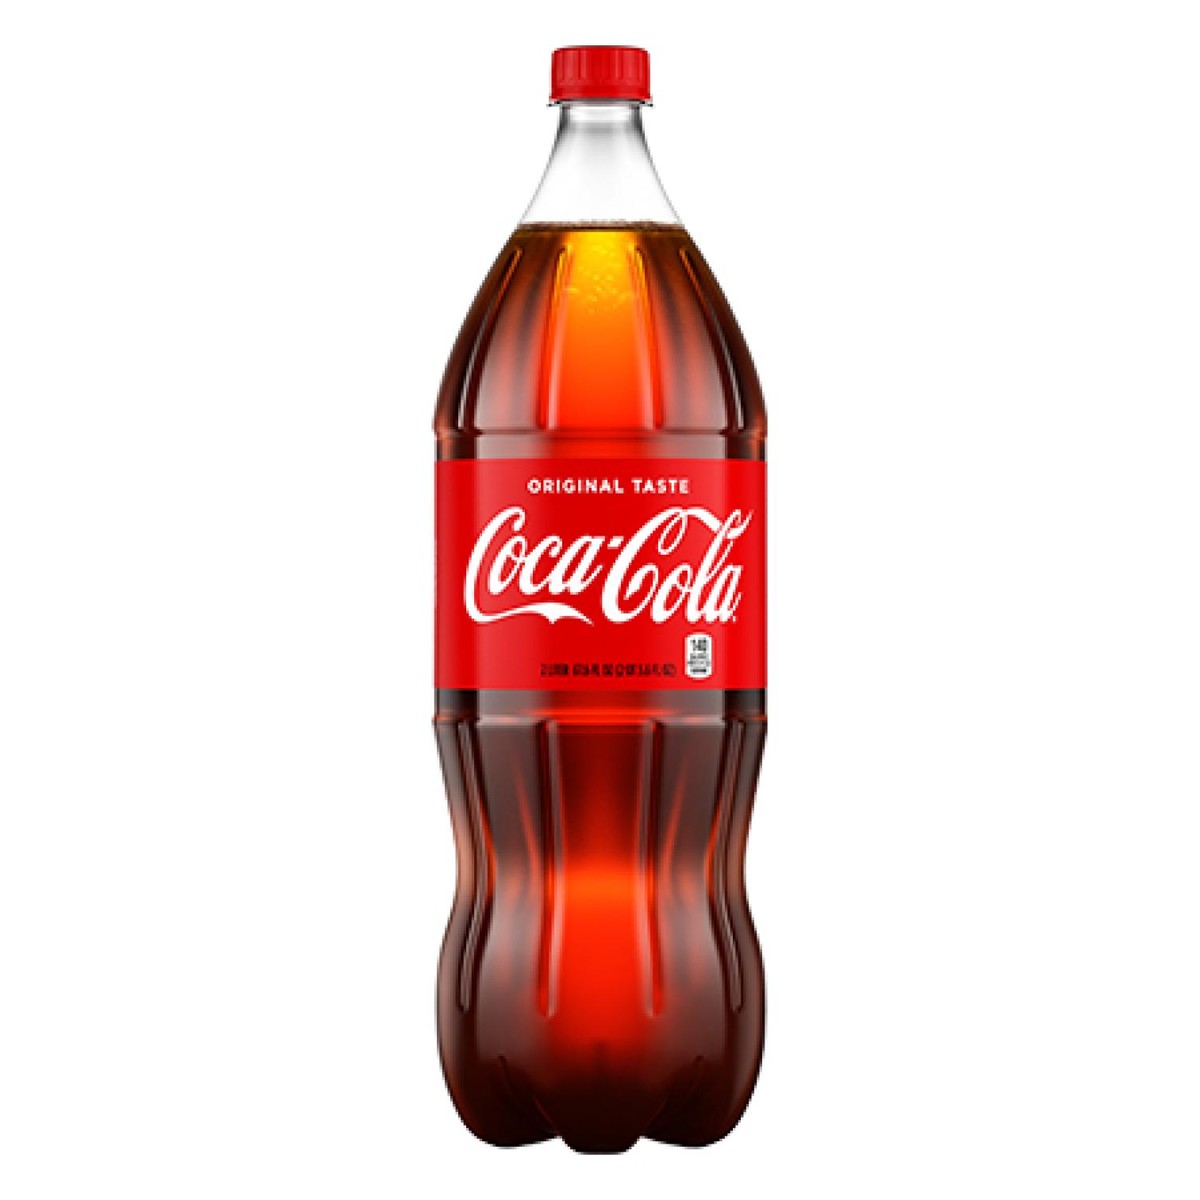 Large 1.5 Liter Canadian Glass Coca Cola Coke Bottle With Metal Cap 